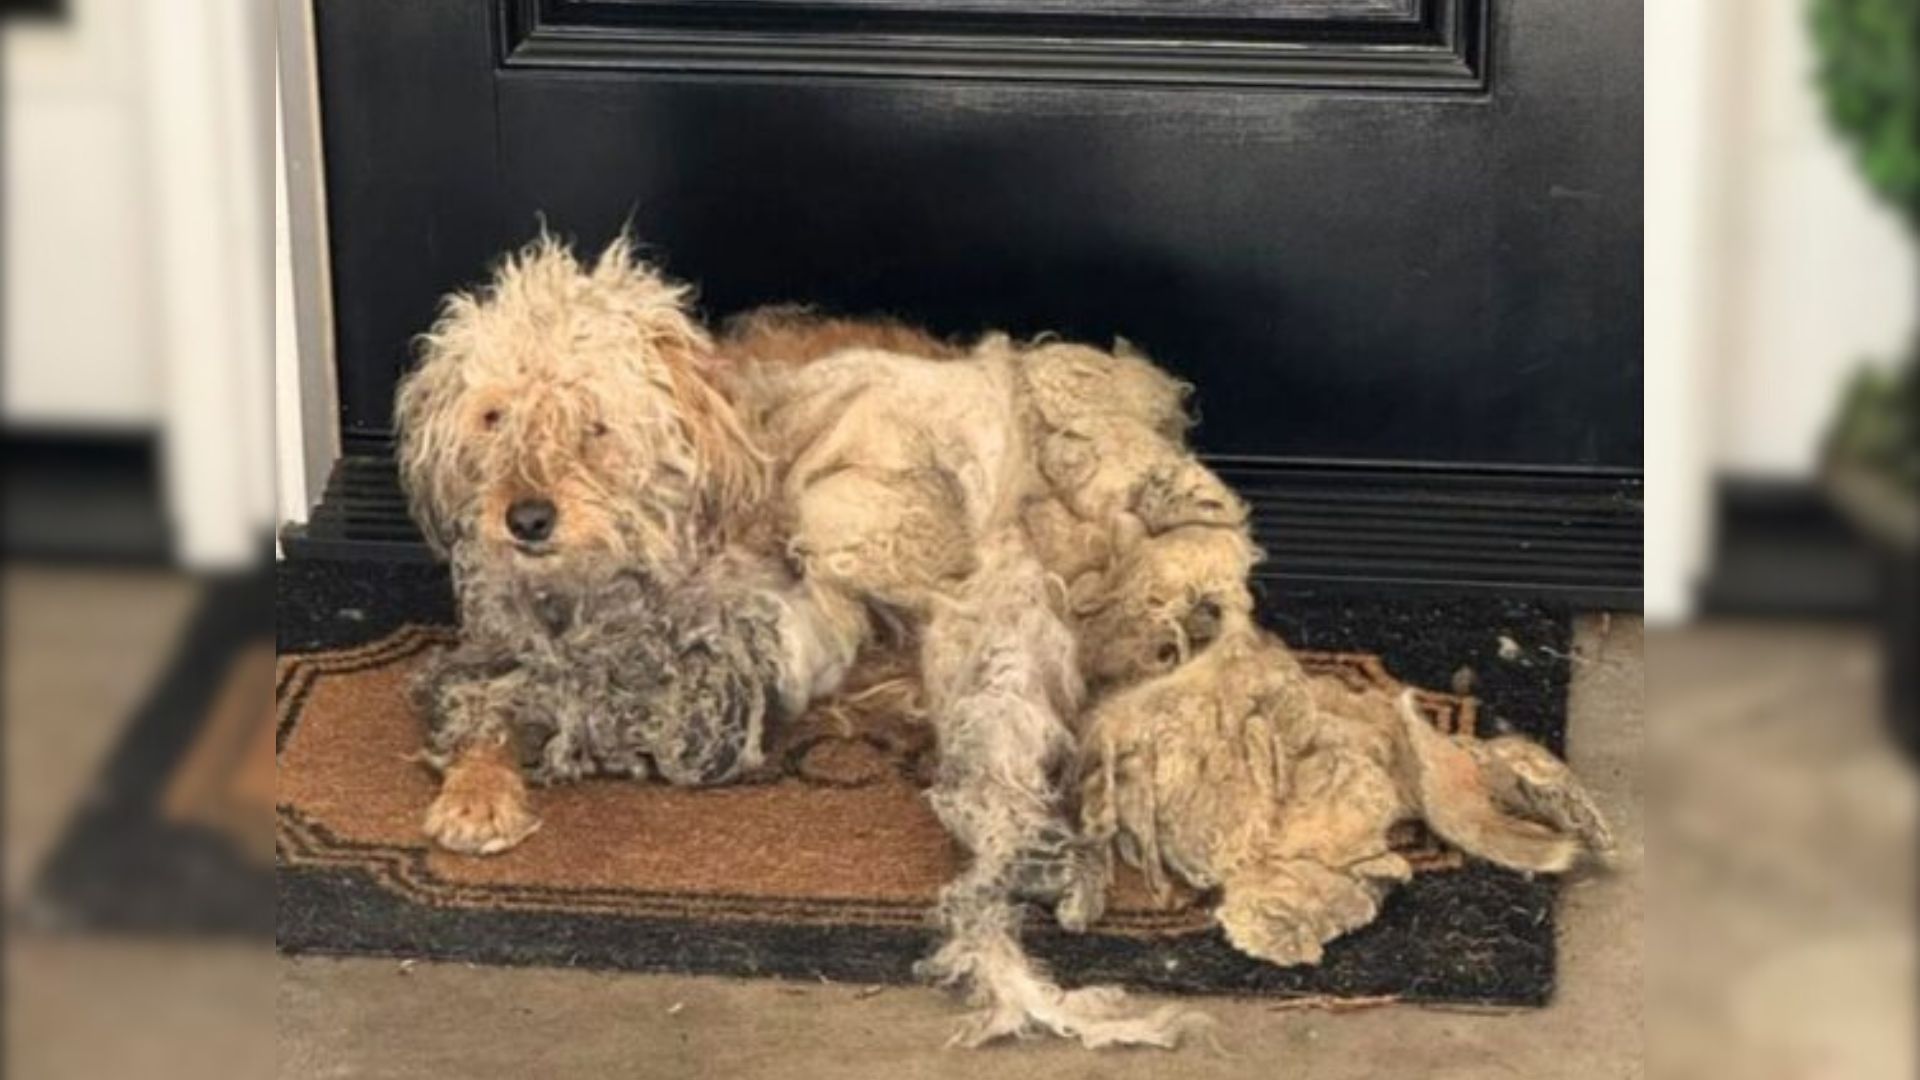 Homeowner Shocked To Find A Dog In Need On Her Doorstep, Begging For Help